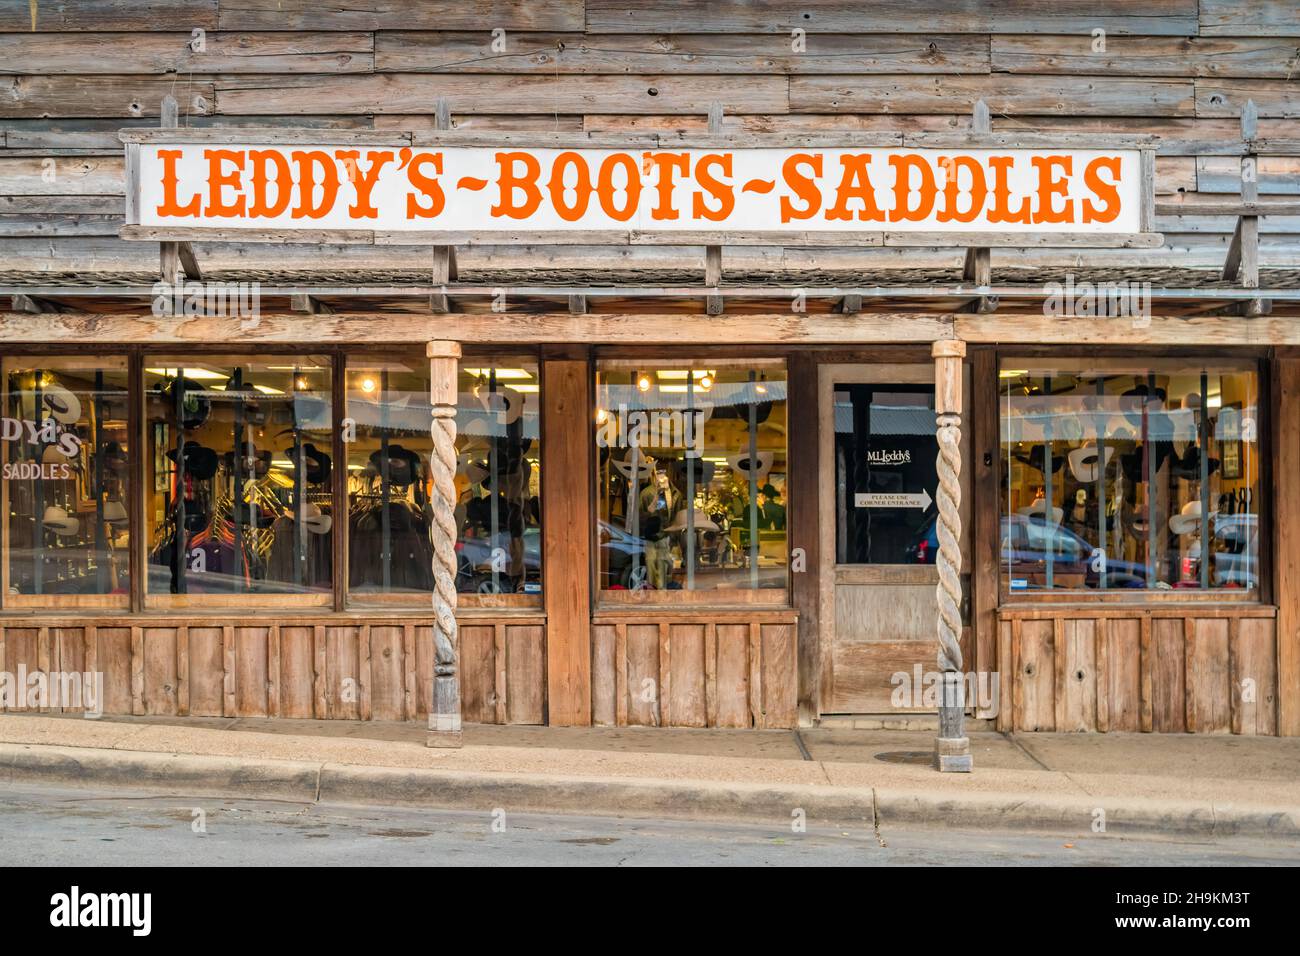 Leddy's Boots and Saddles western style store at Fort Worth Stockyards, Texas, USA. Stock Photo